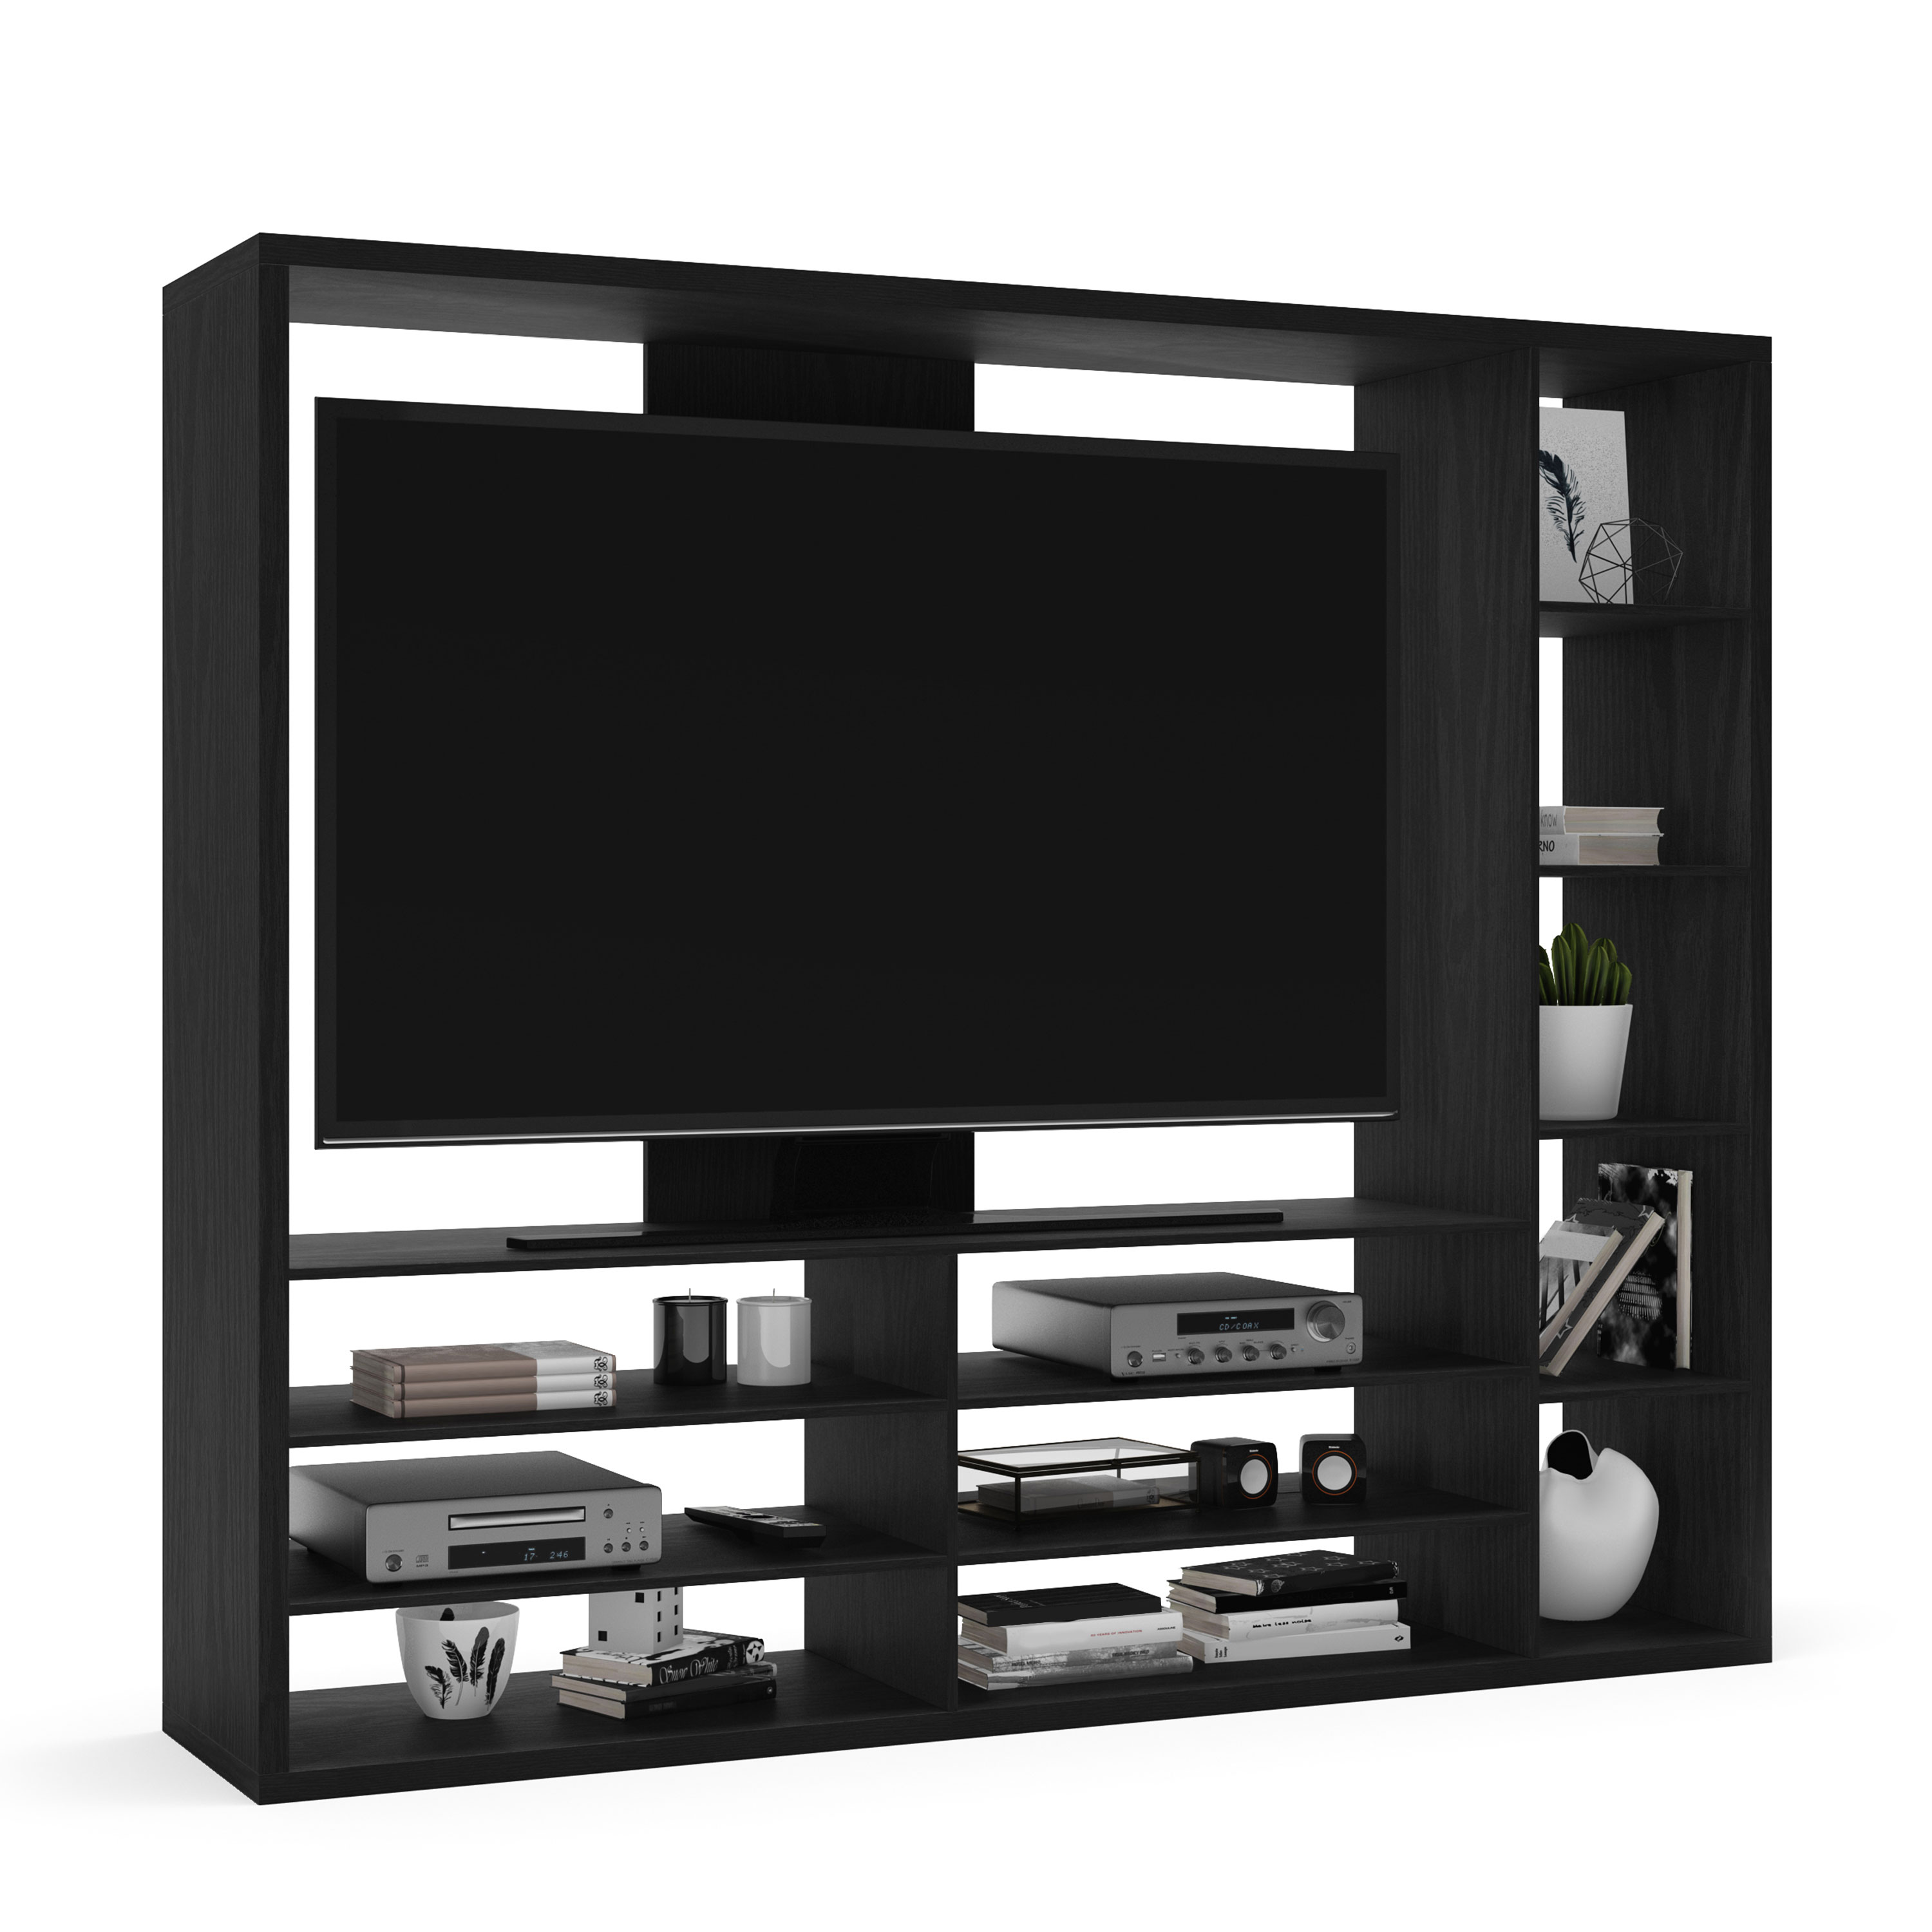 Mainstays Entertainment Center for TVs up to 55", Black - image 3 of 6